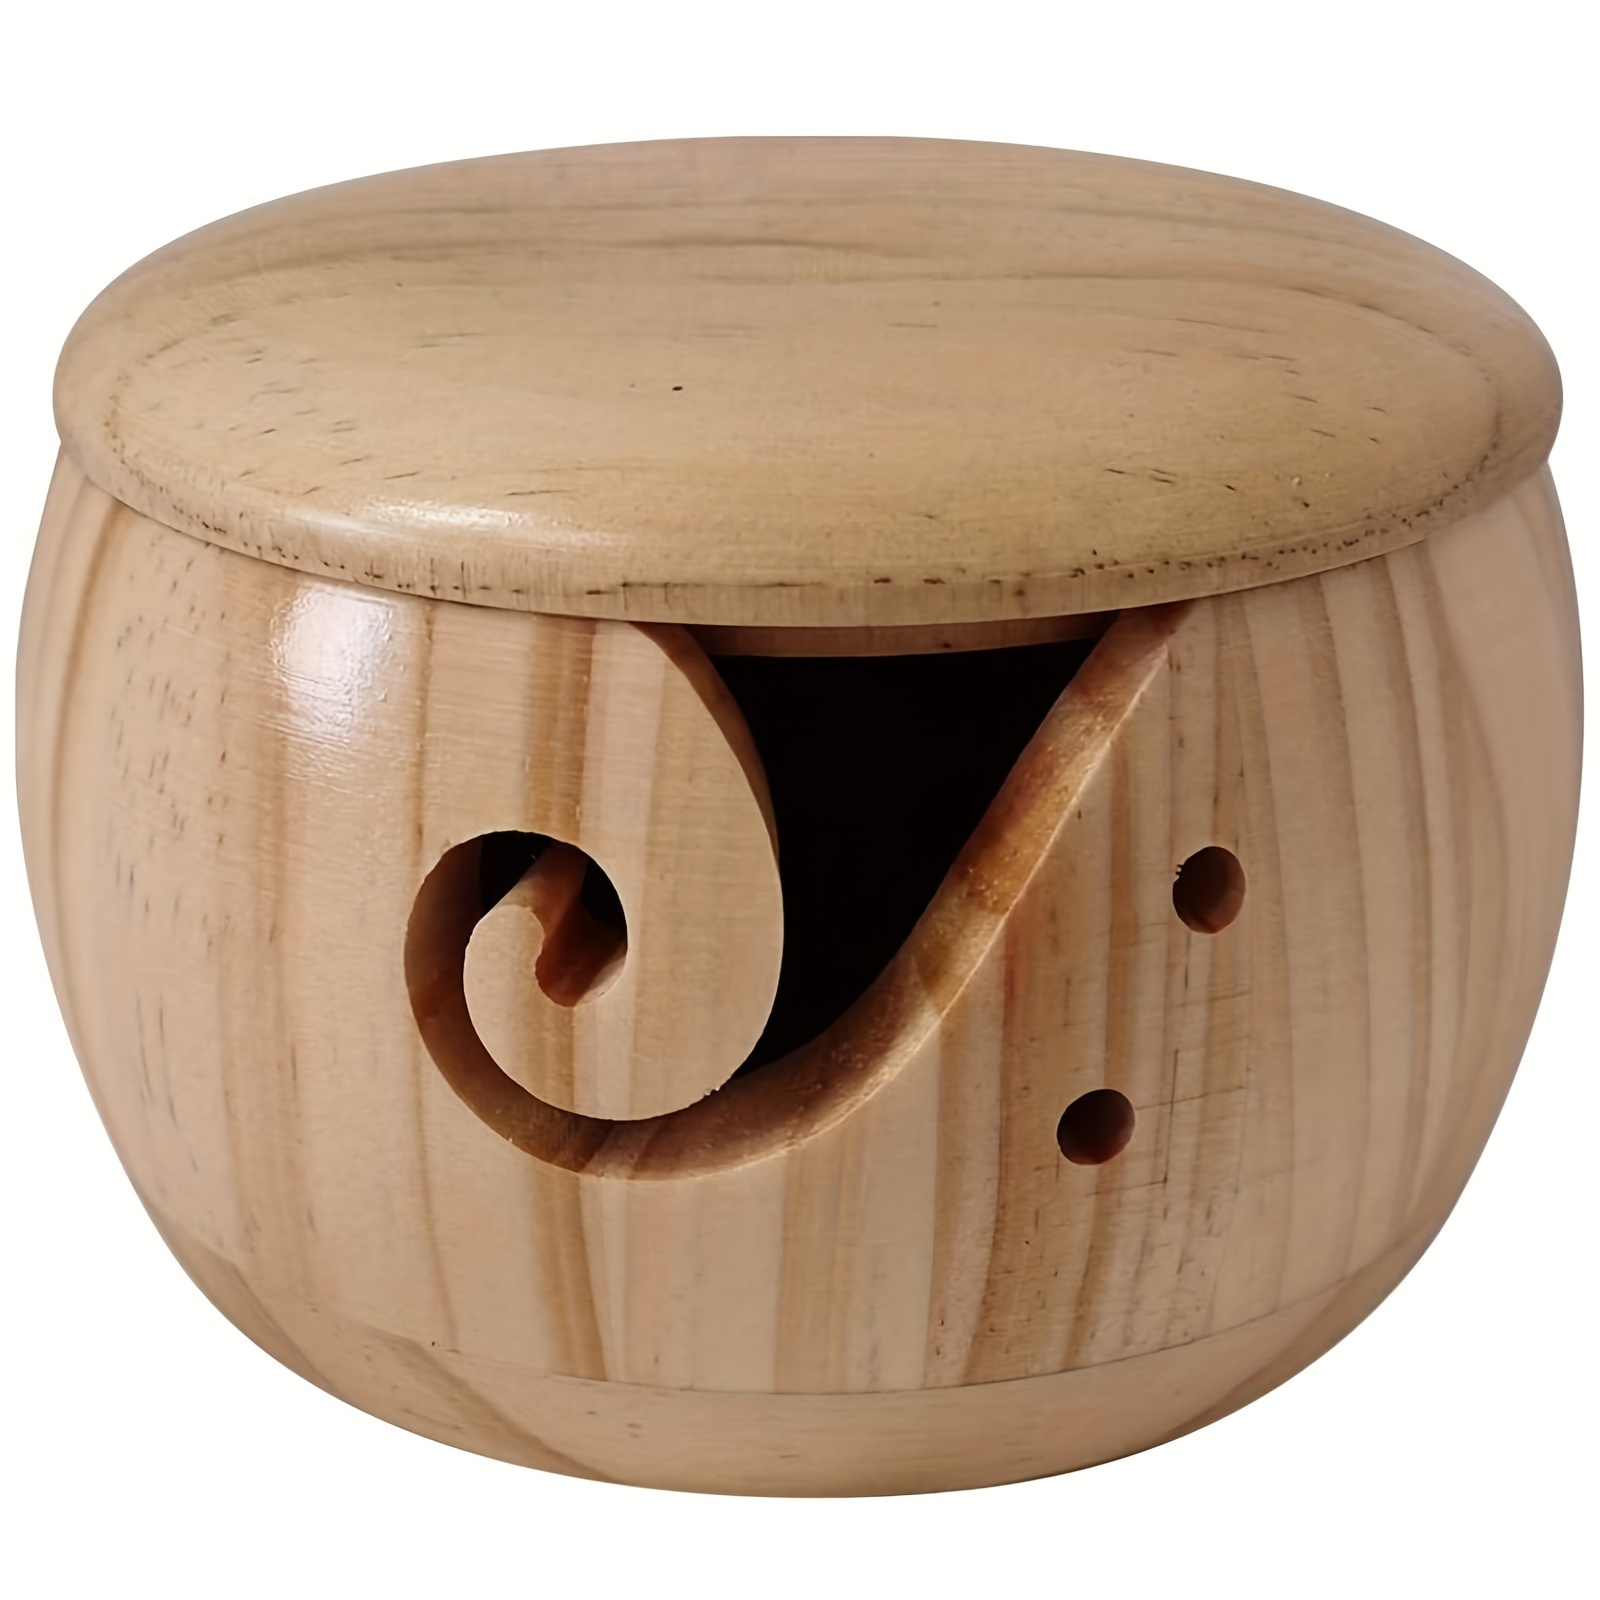  Wooden Yarn Bowl Yarn Storage Bowl with Removable Lid Home  Needlework Yarn Holder for Knitting and Crochet Accessories Kit